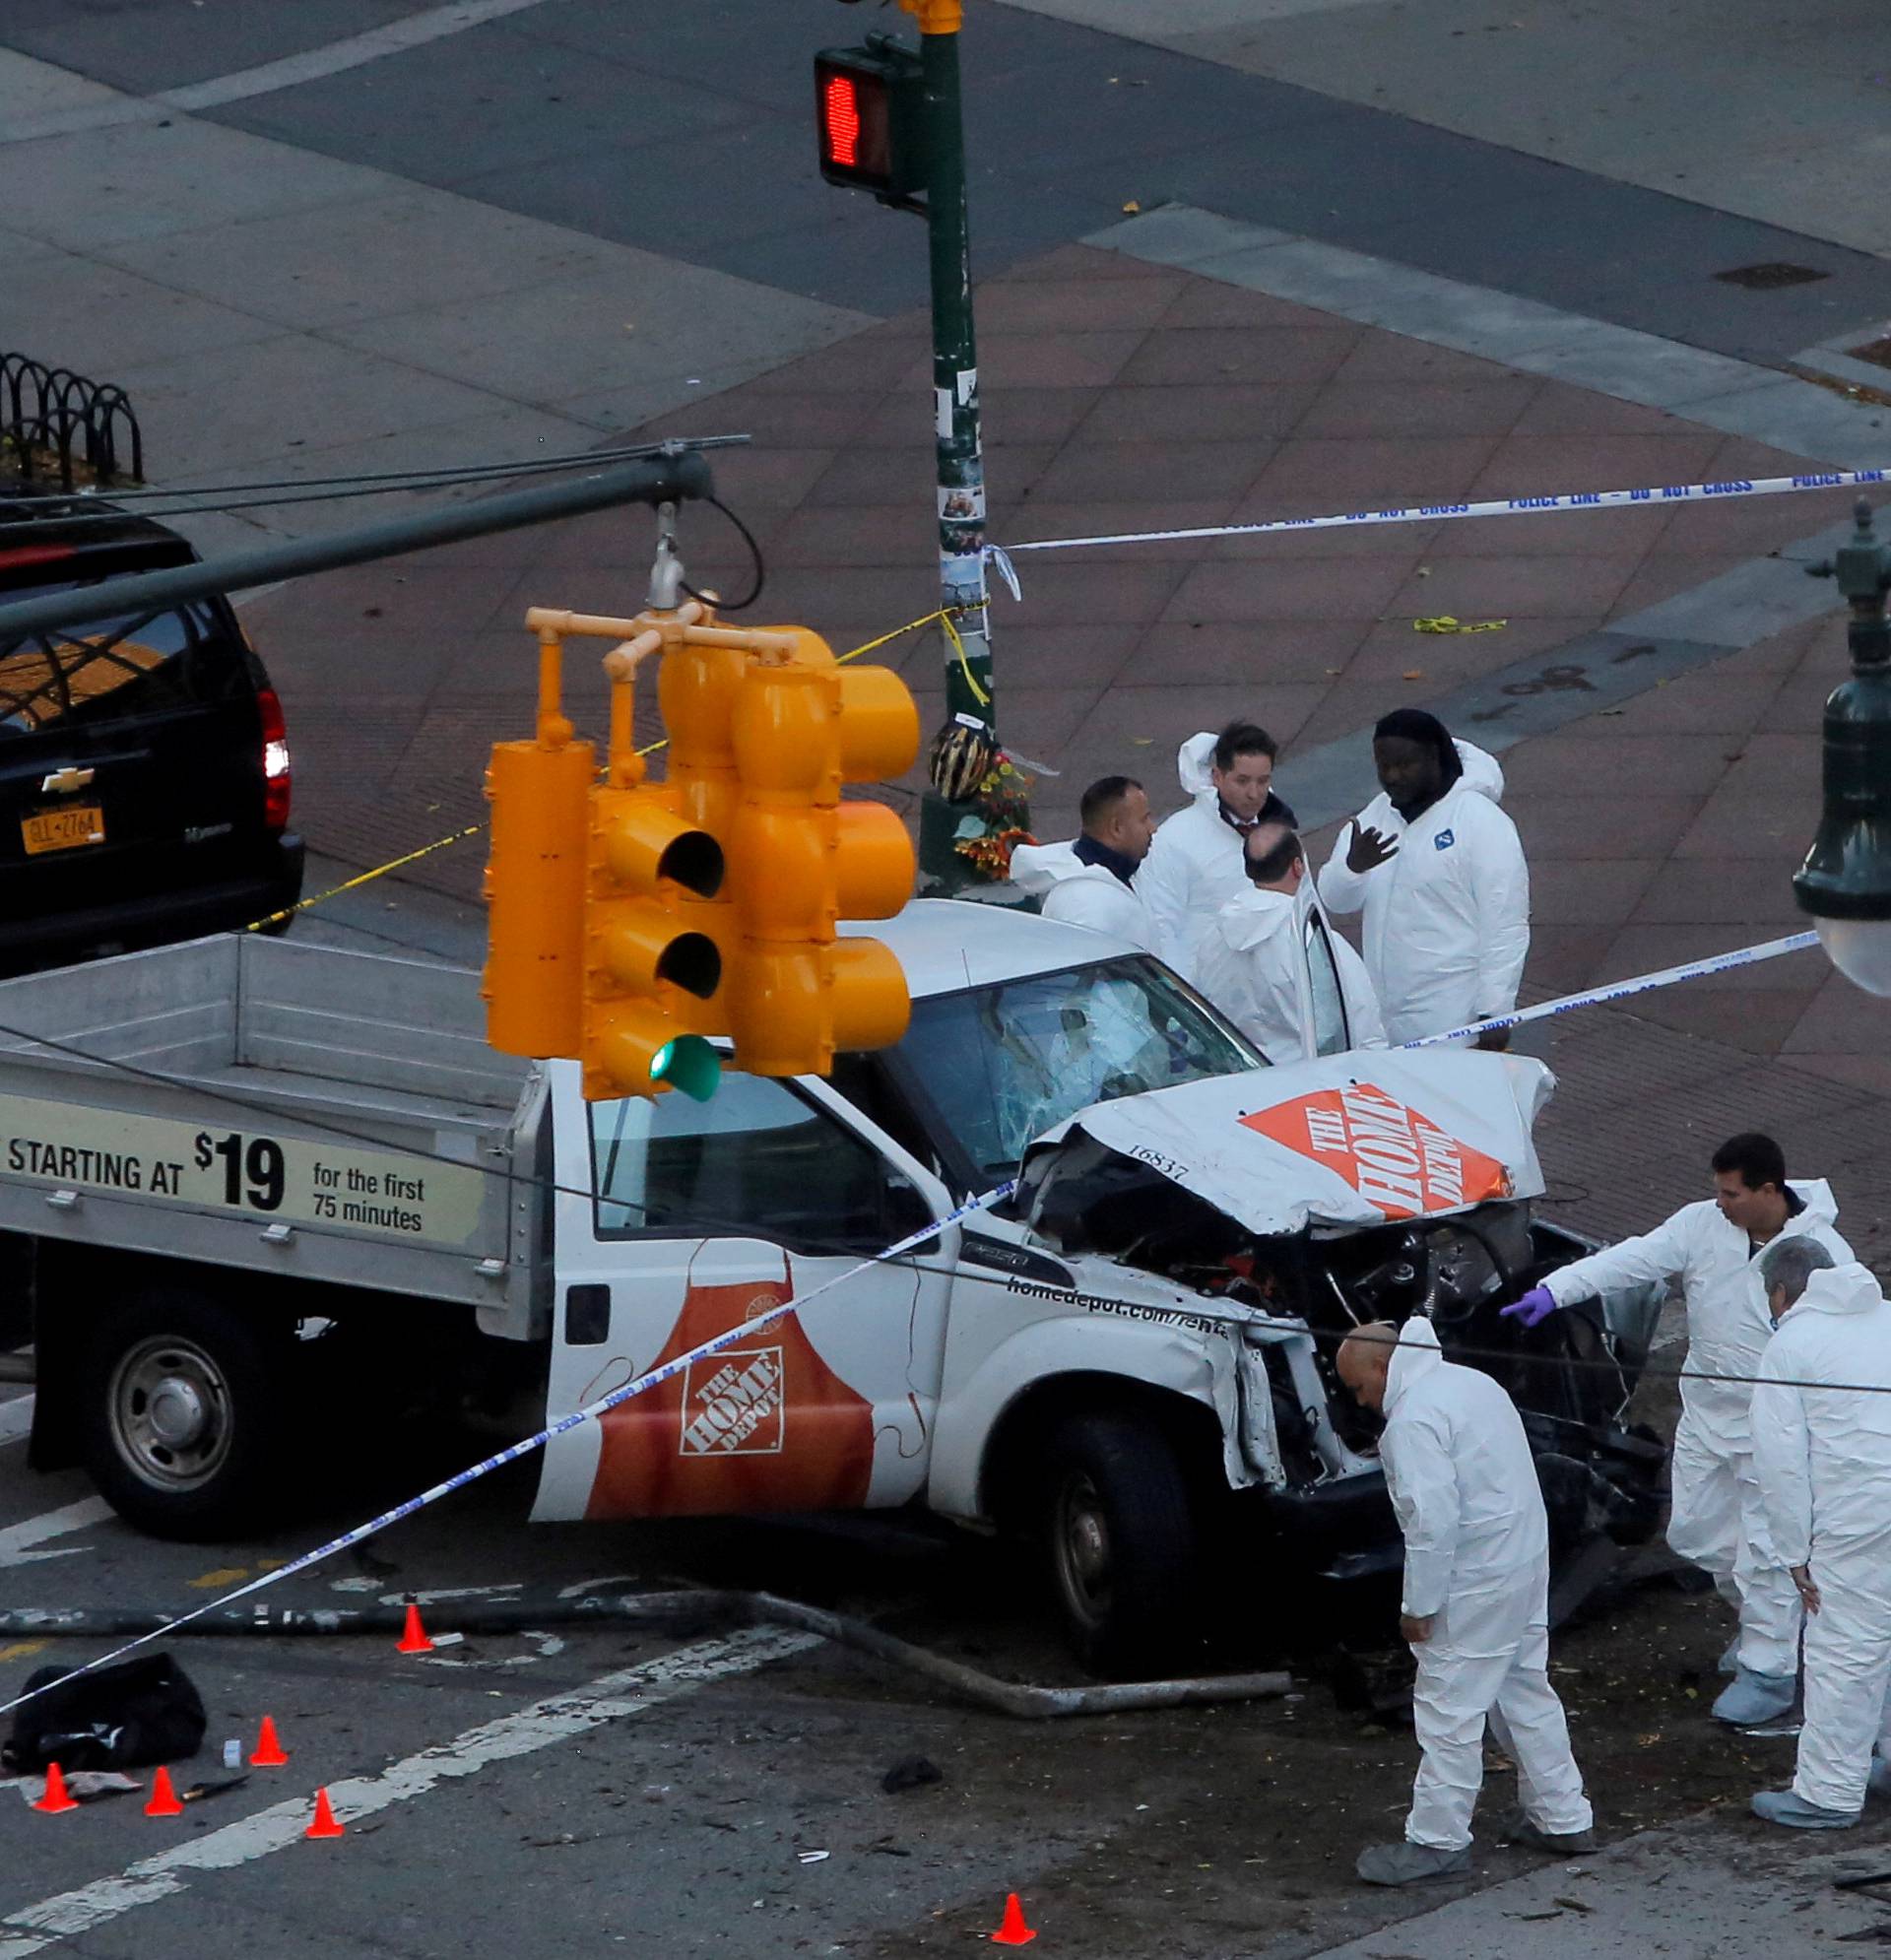 Police investigate a vehicle allegedly used in a ramming incident on the West Side Highway in Manhattan, New York, U.S.